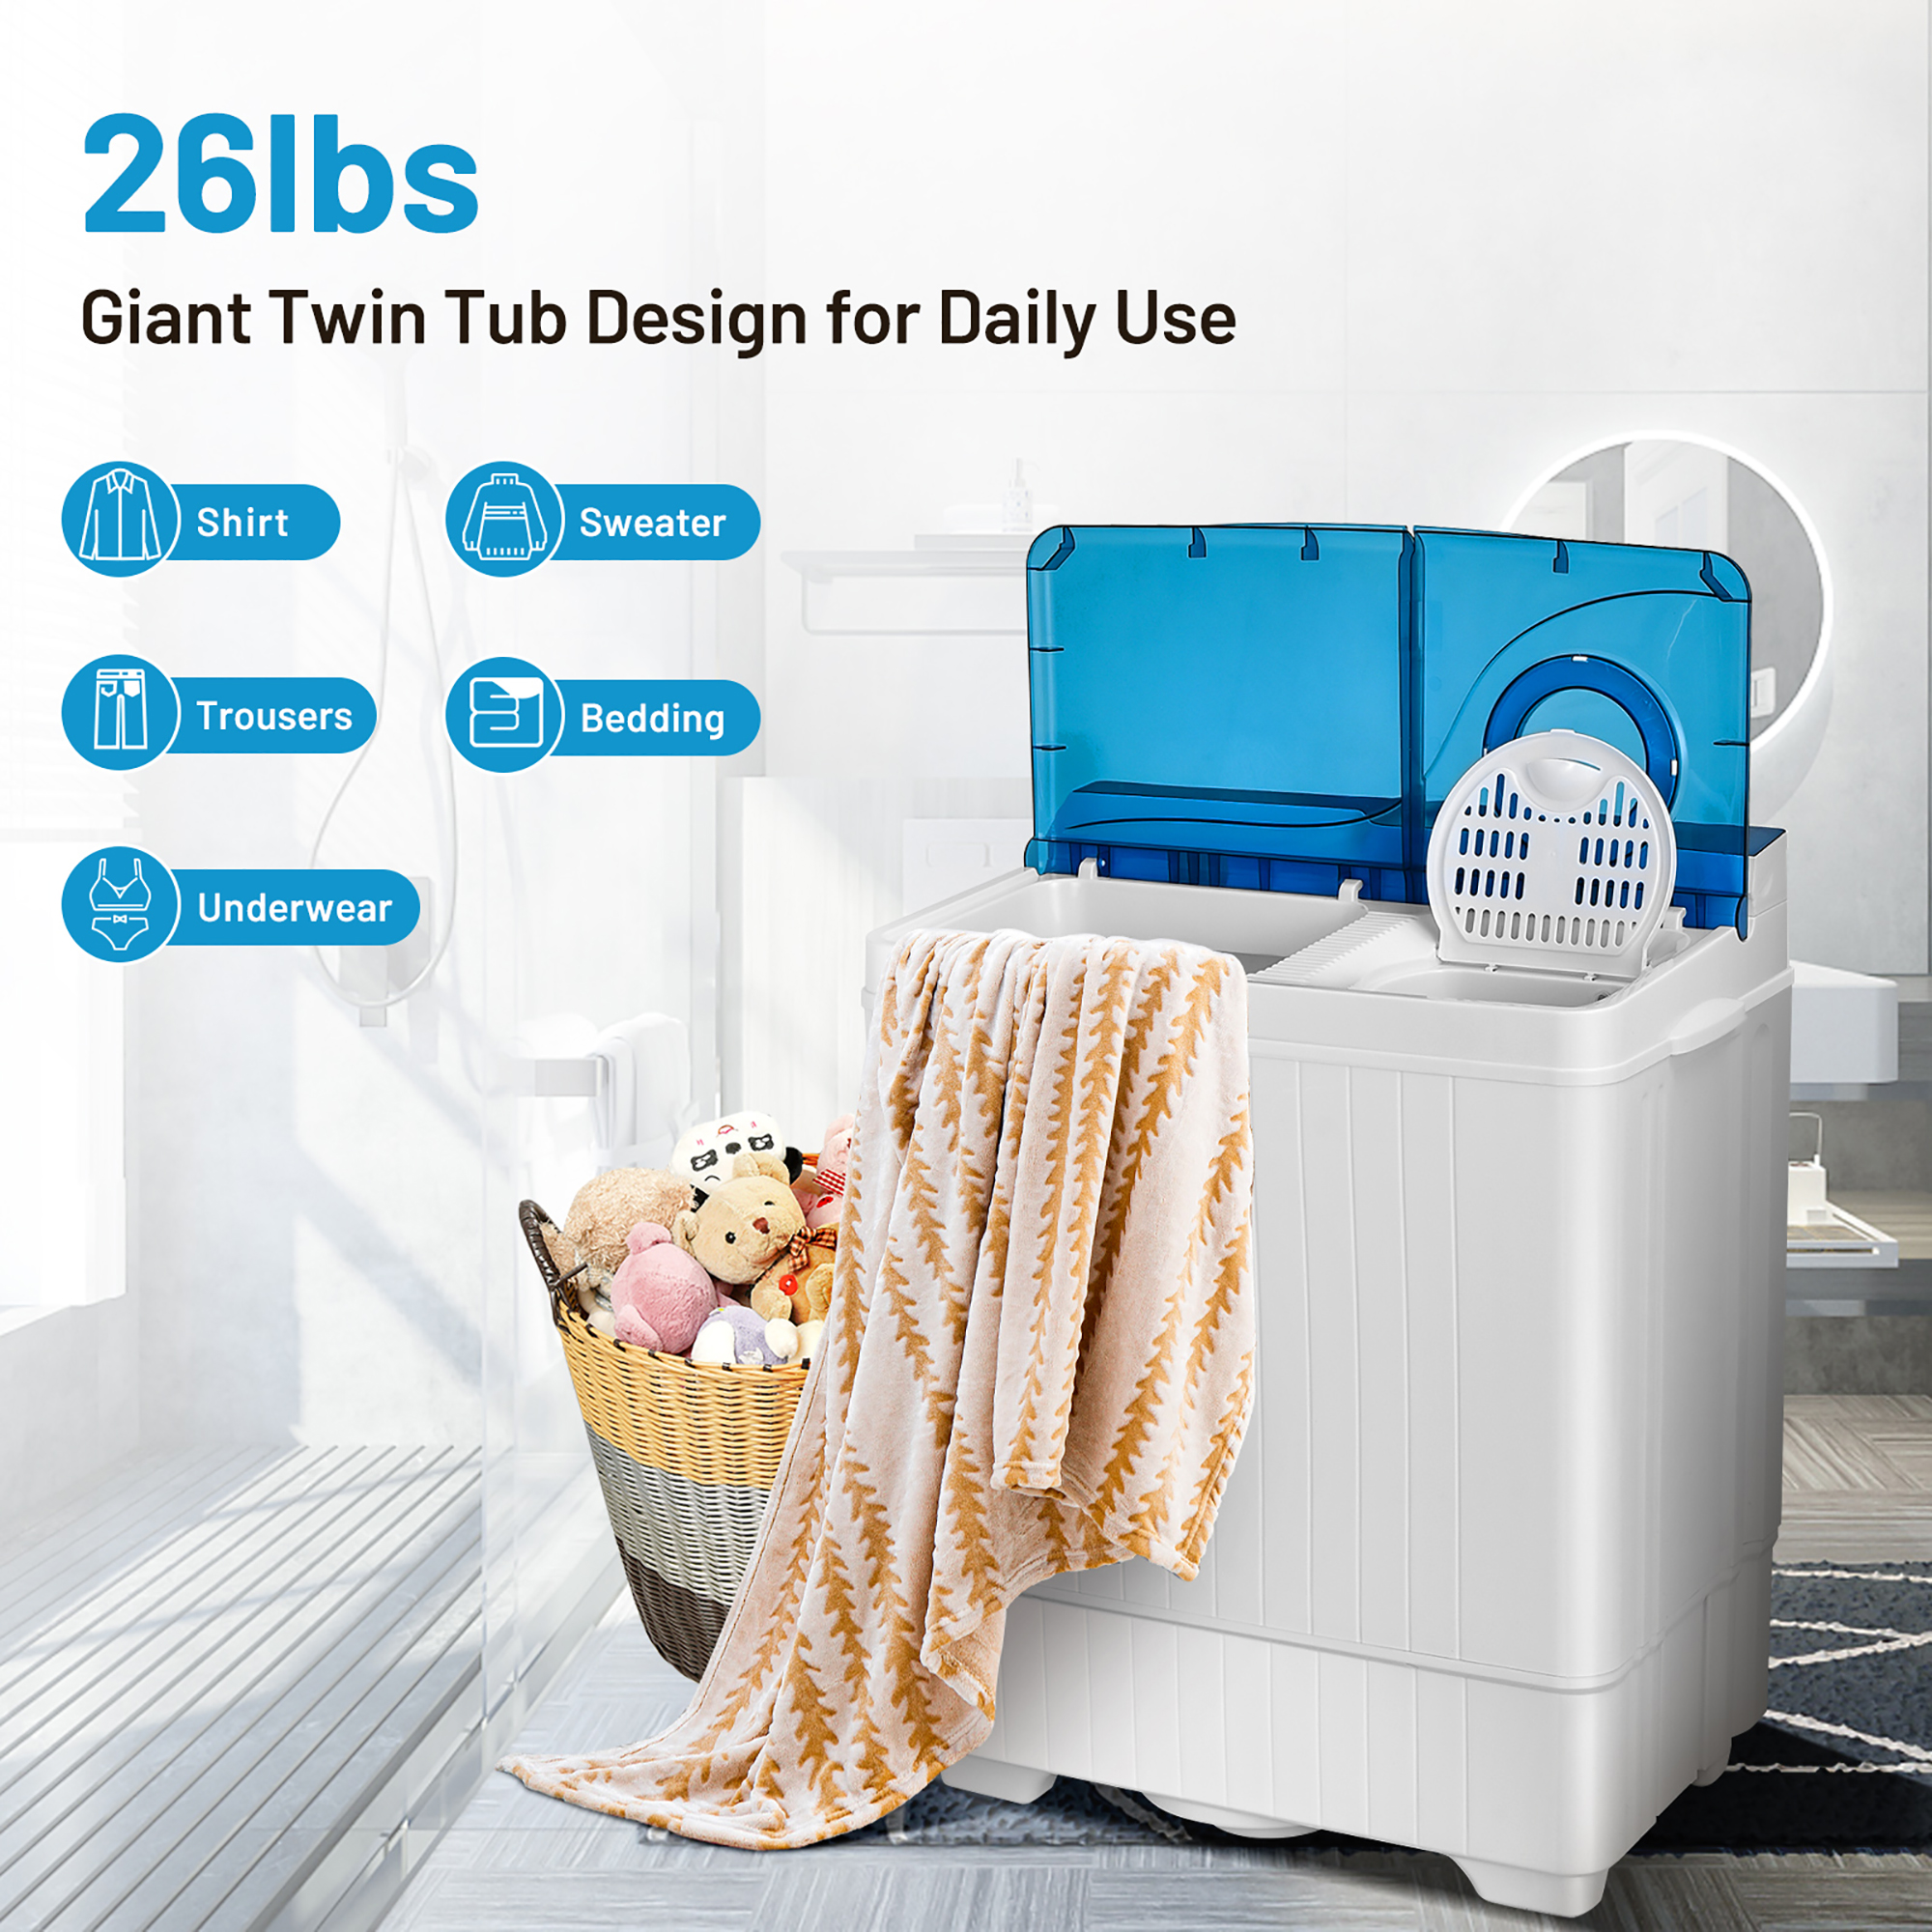 Costway 26lbs Portable Semi-automatic Washing Machine W/Built-in Drain Pump Blue - image 5 of 10